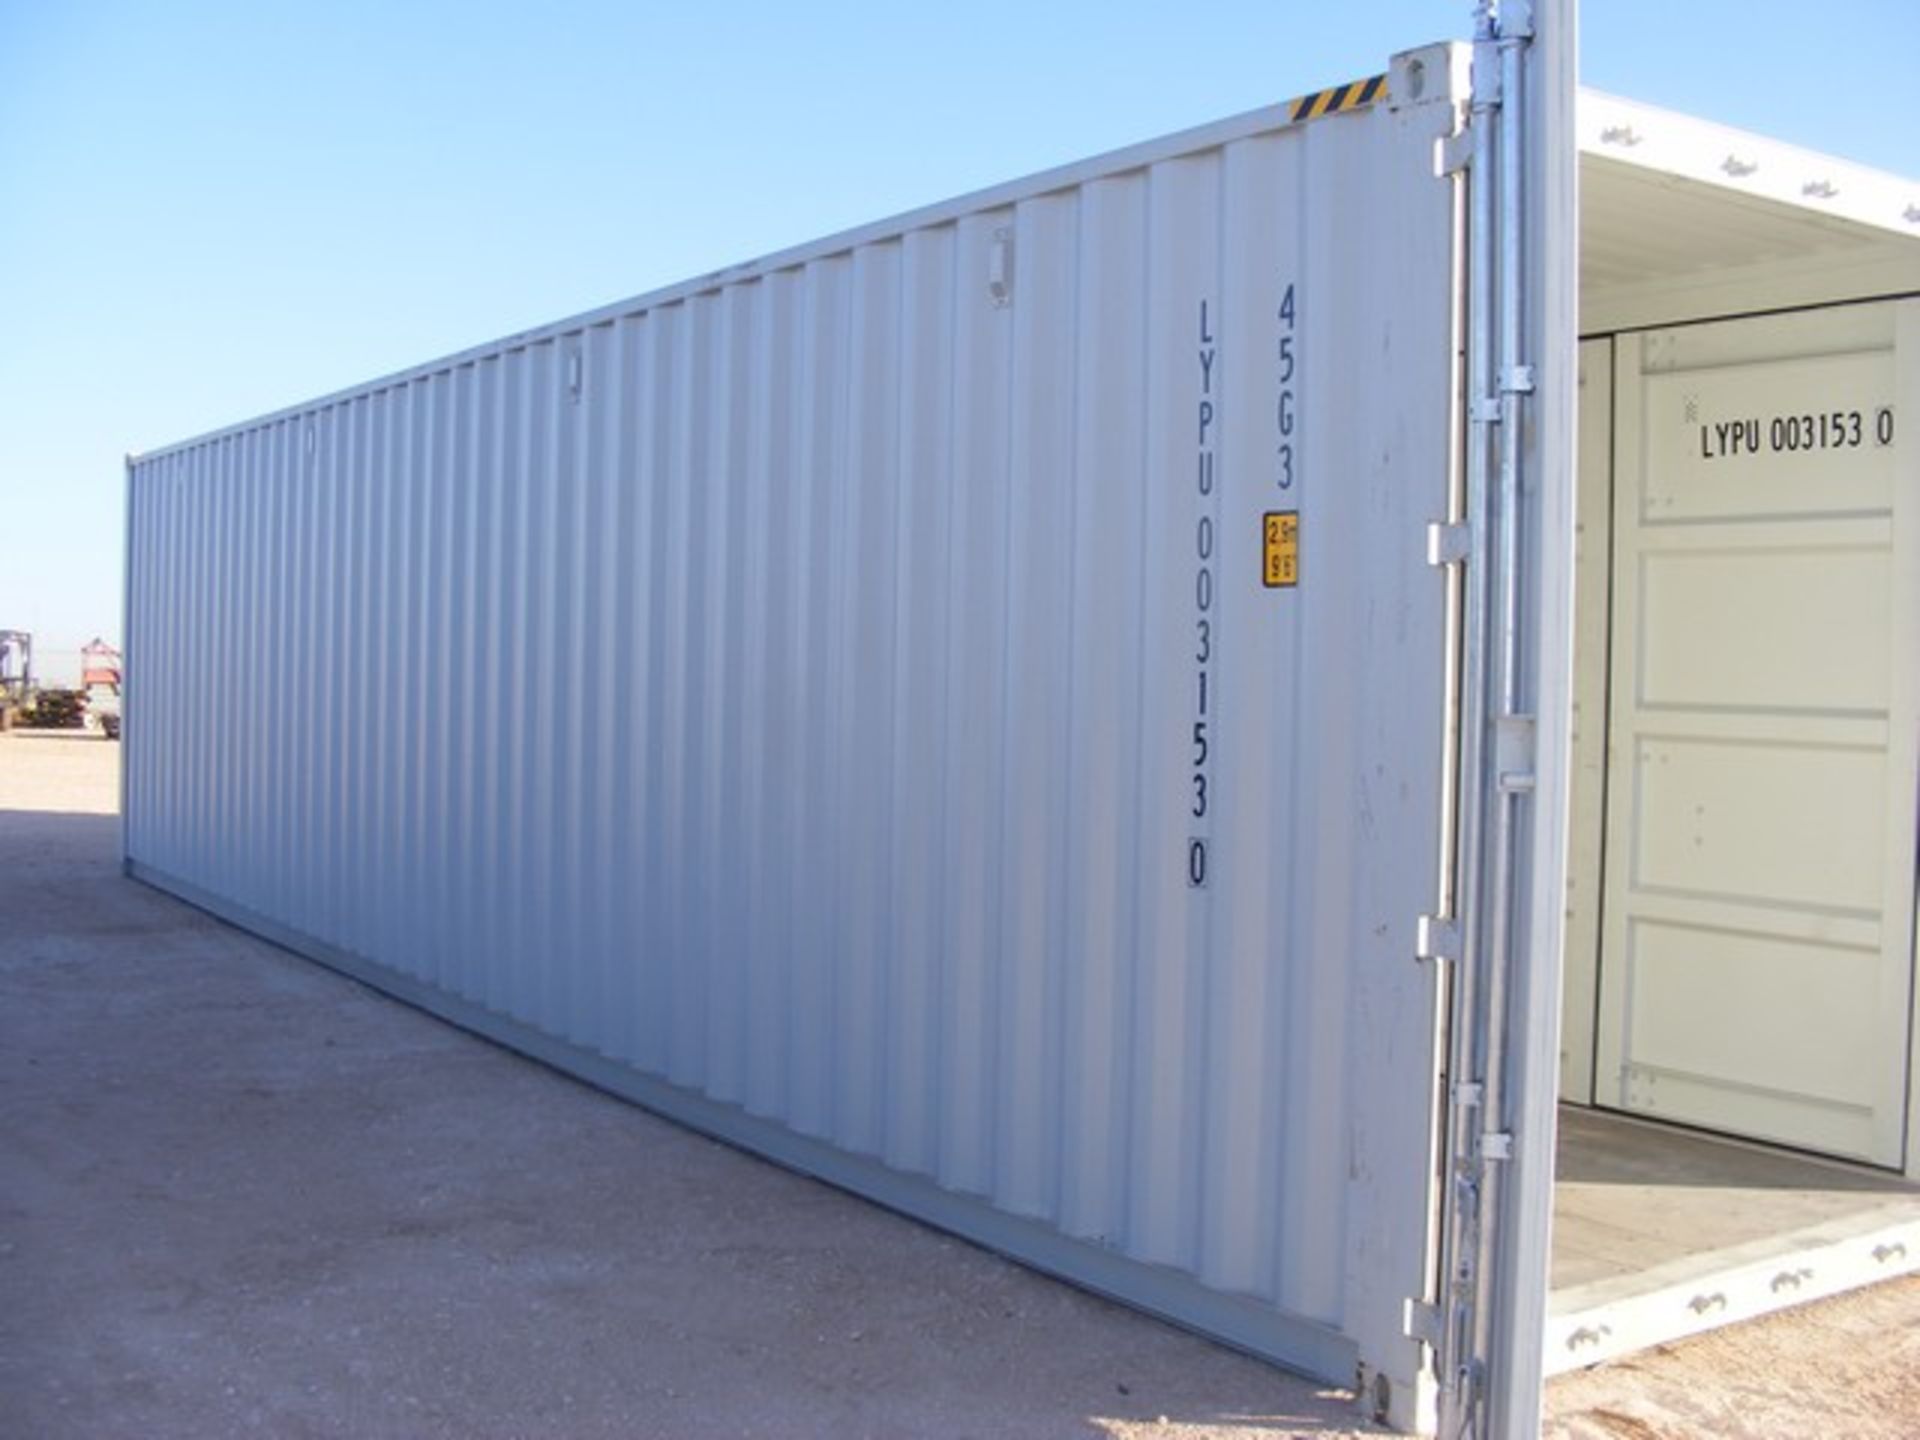 Located in YARD 1 - Midland, TX 40' H CUB SEA CONTAINER W/ (4) SIDE OPEN DOORS, (1) END DOOR - Image 3 of 3